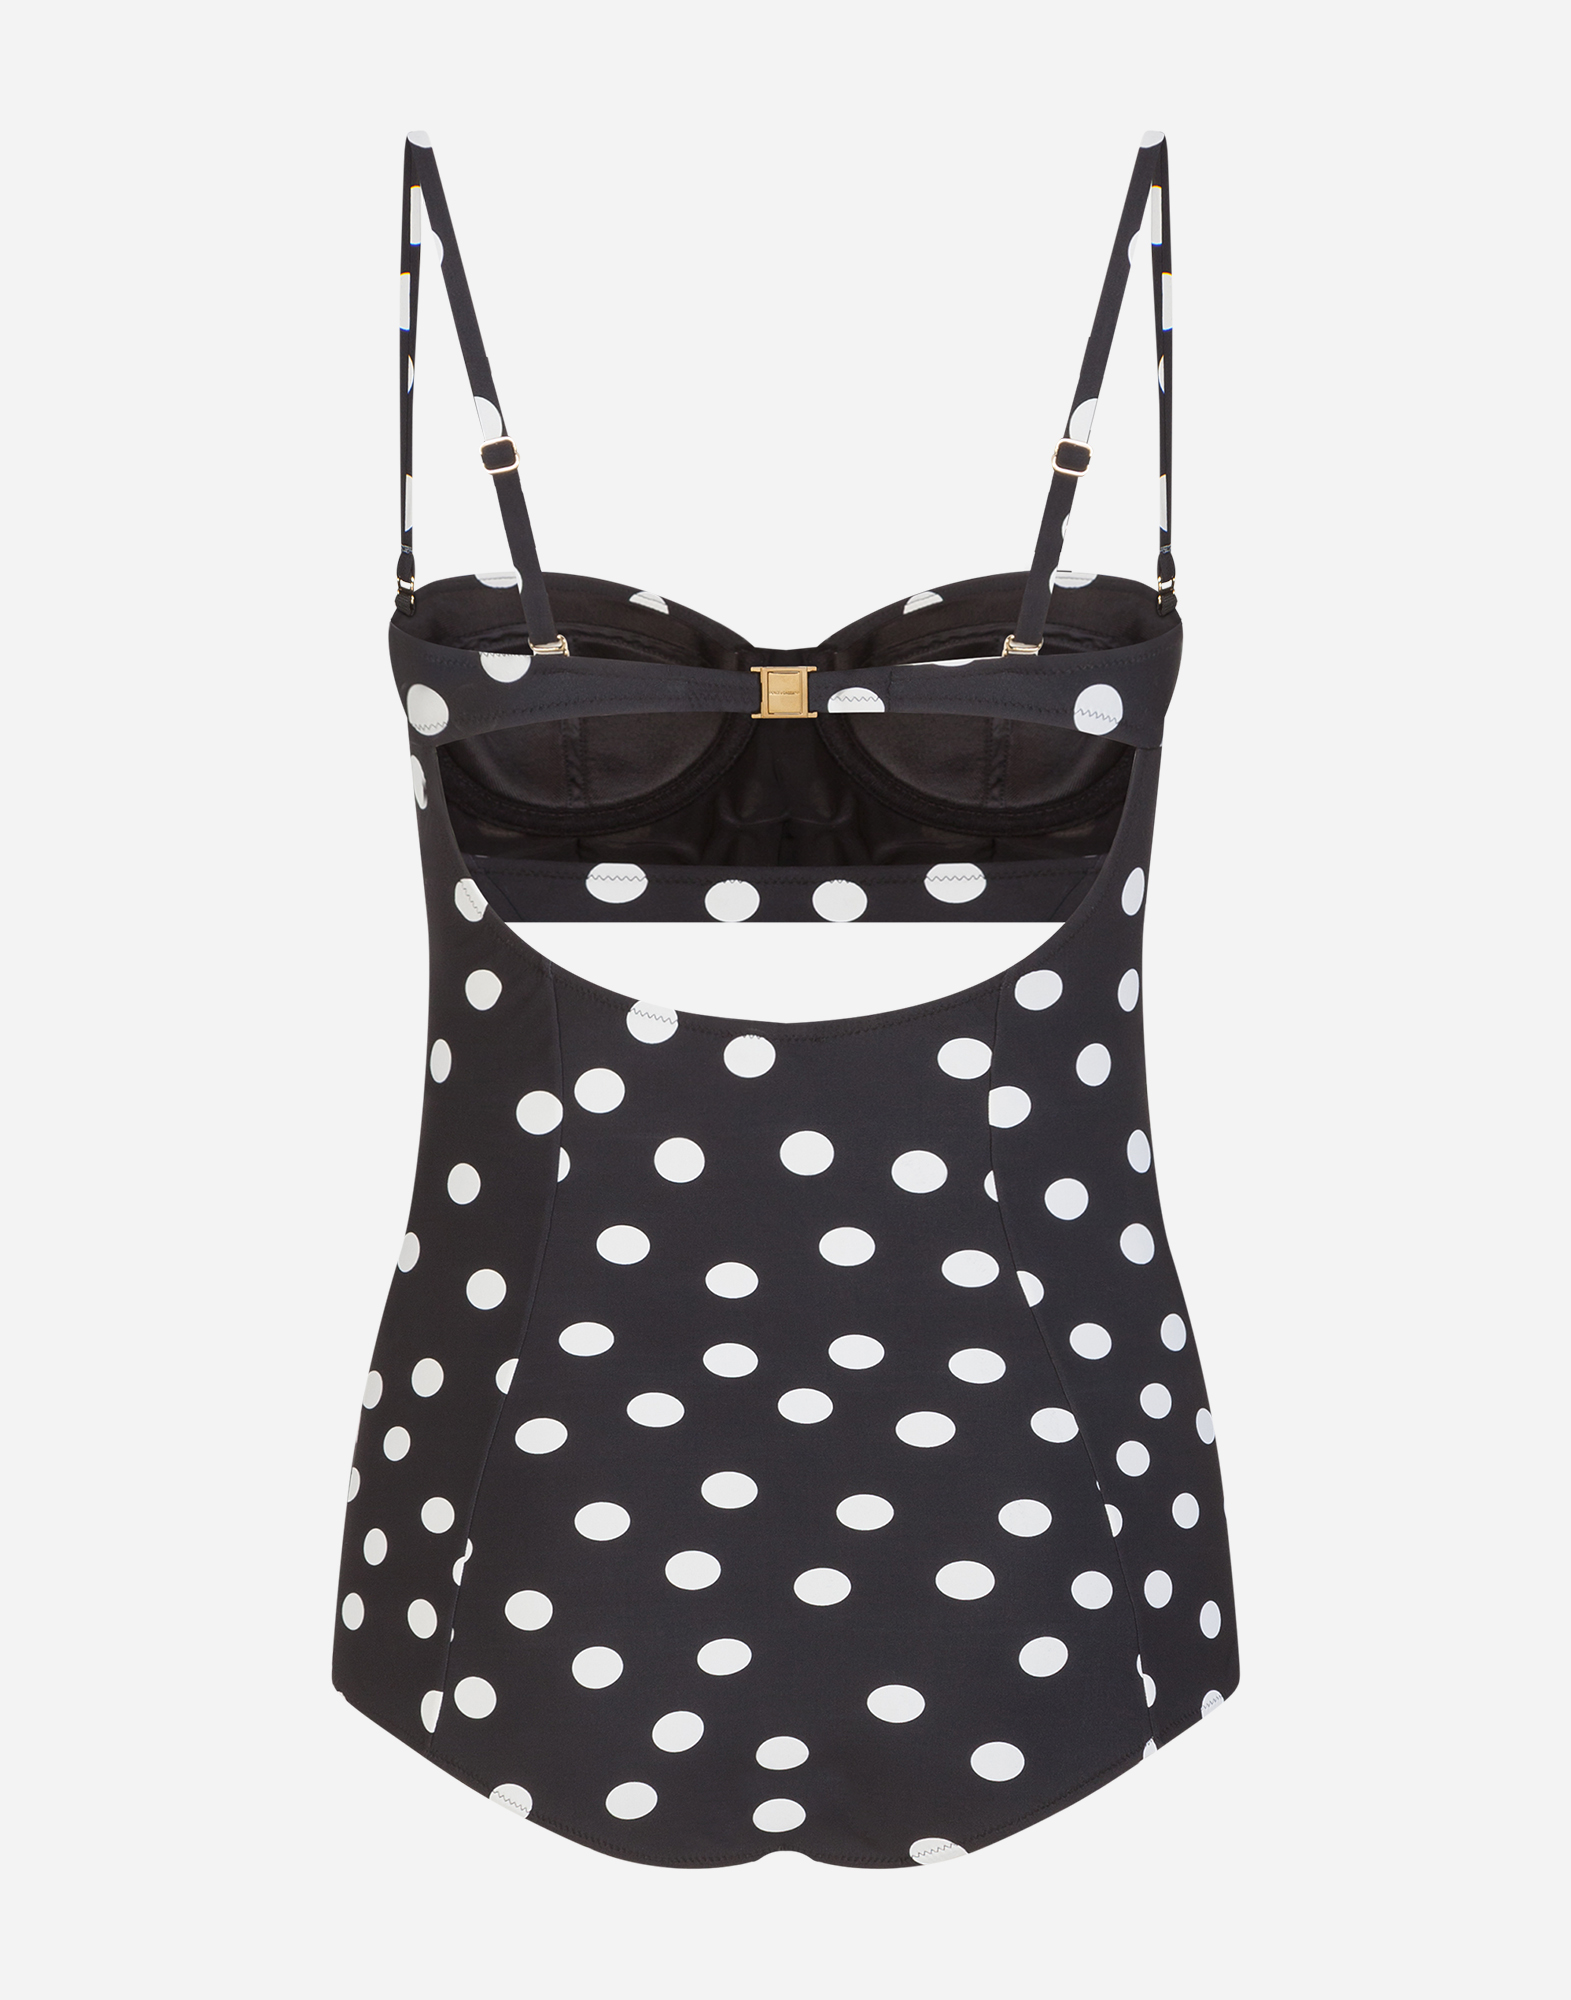 One-piece balconette swimsuit with polka dot print